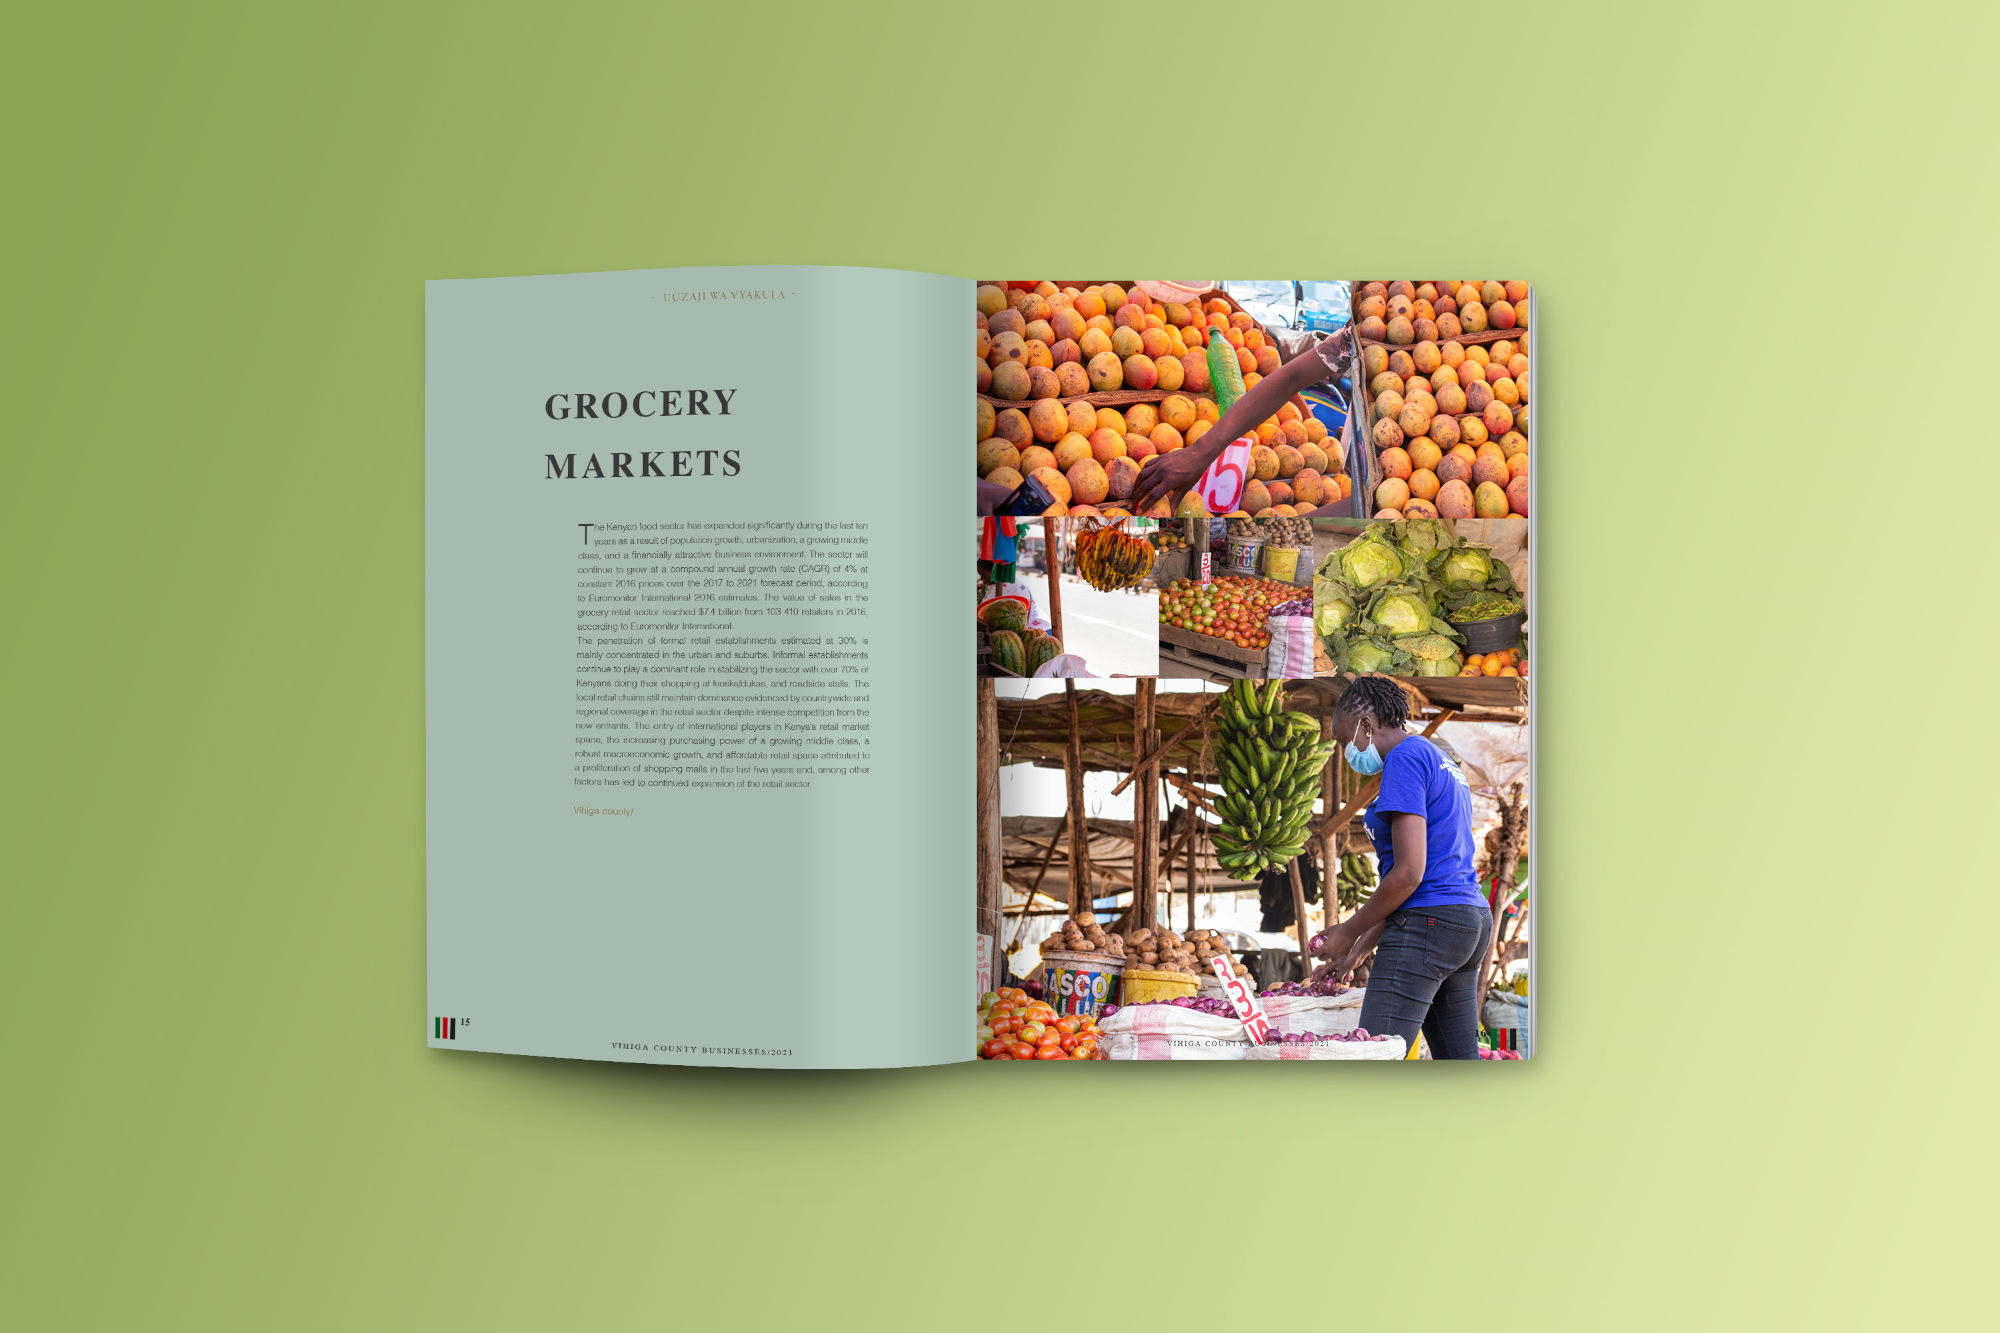 Inside page spread of journal on 'Grocery markets' with photos of  fruit on display at stalls